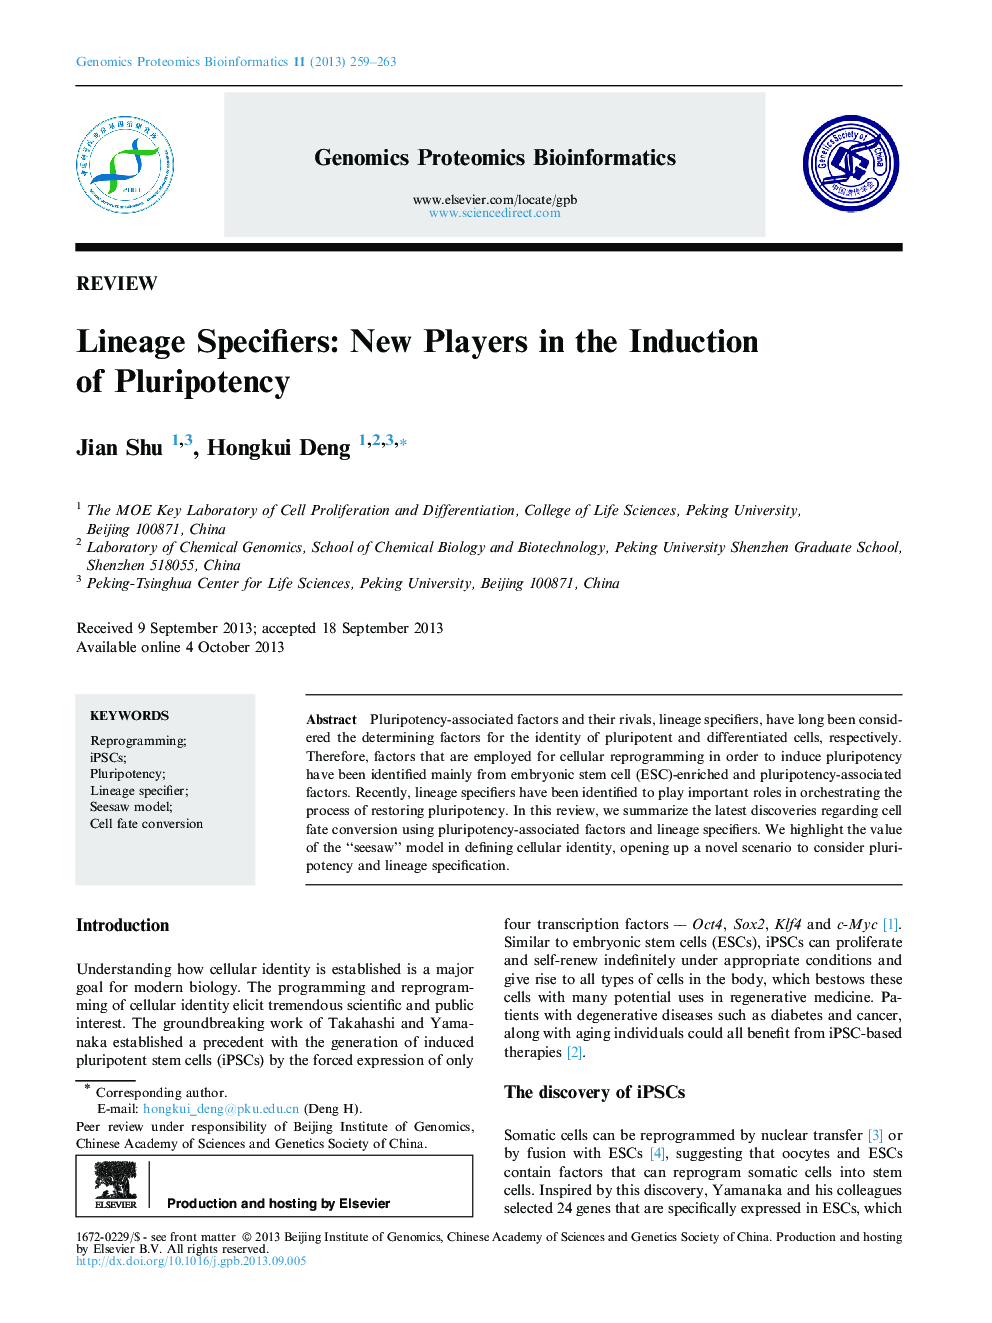 Lineage Specifiers: New Players in the Induction of Pluripotency 